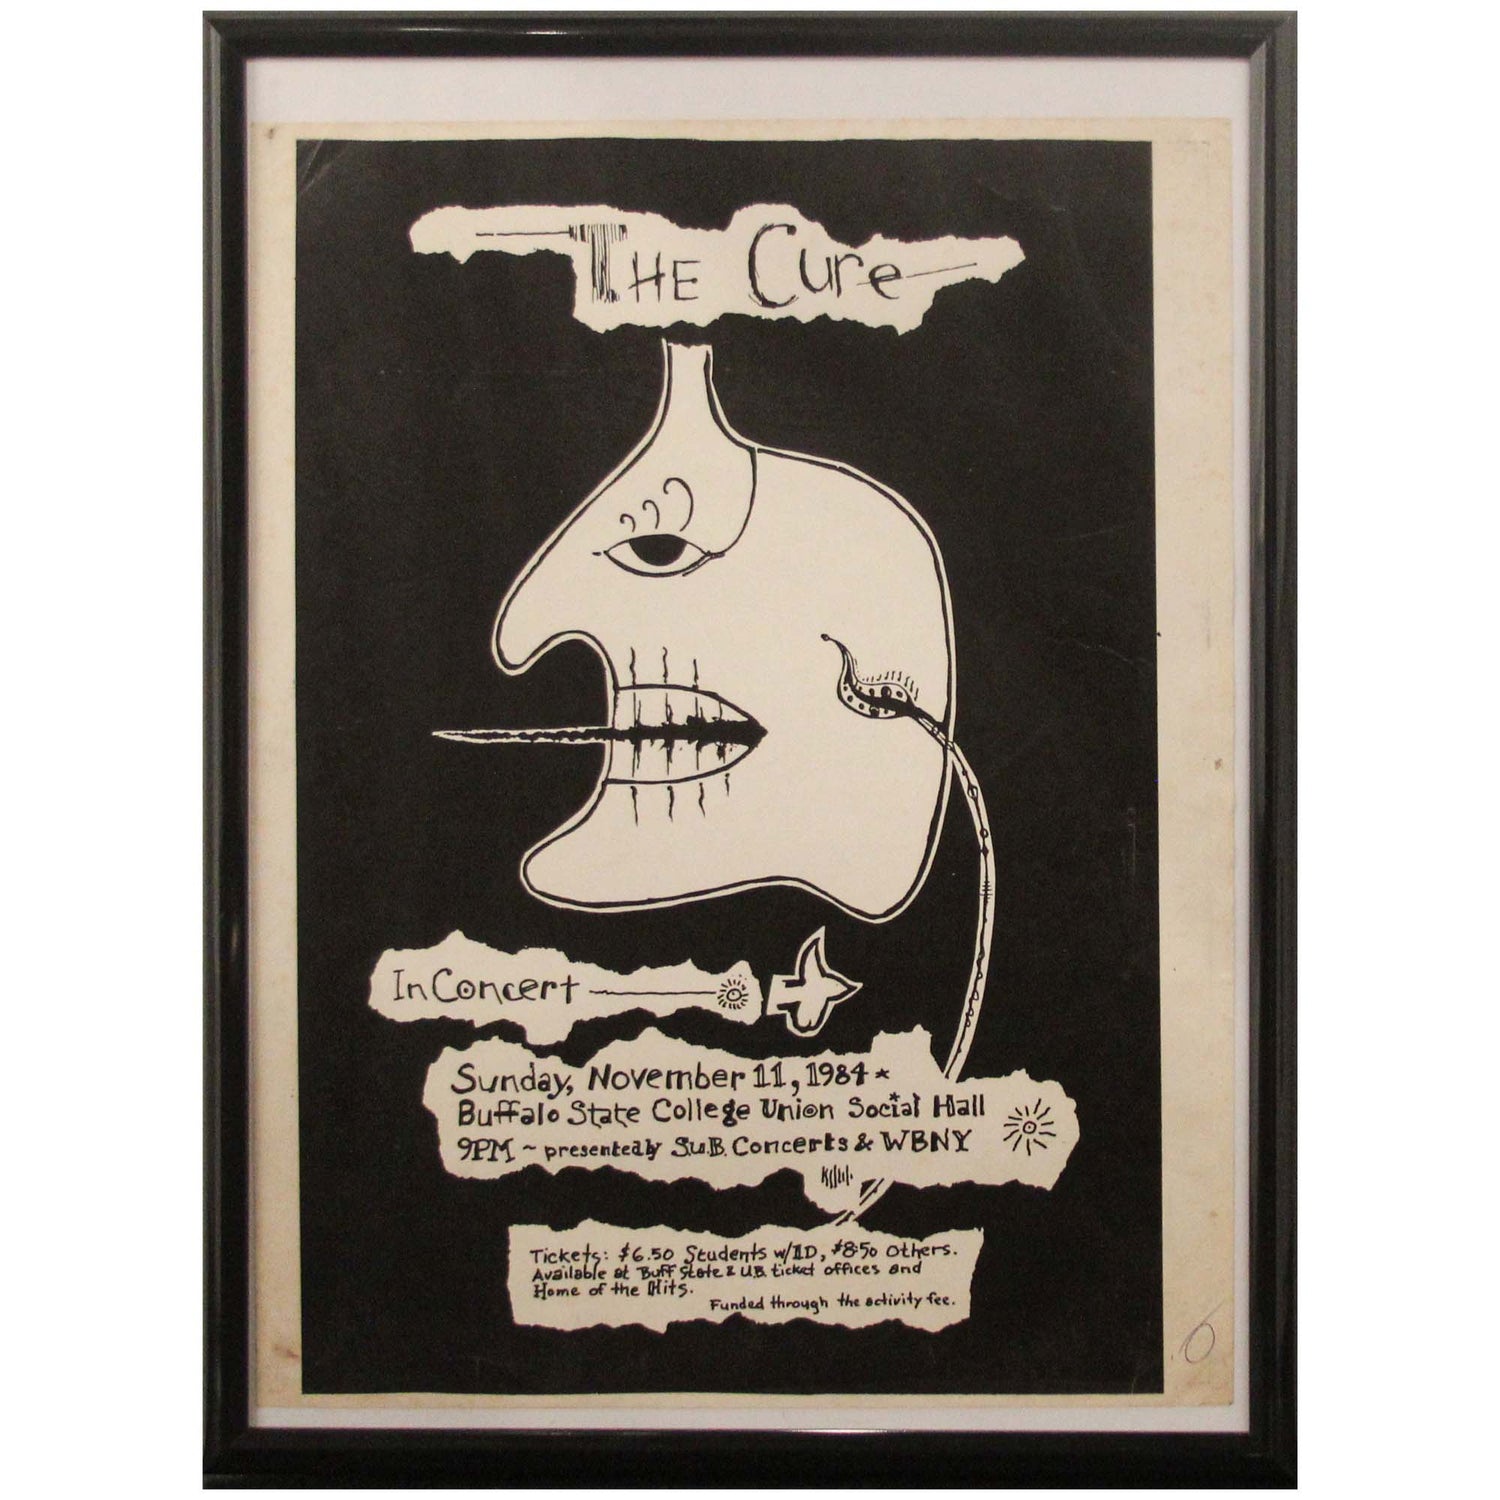 The Cure 1984 - Tour Concert Poster Zoom Our View